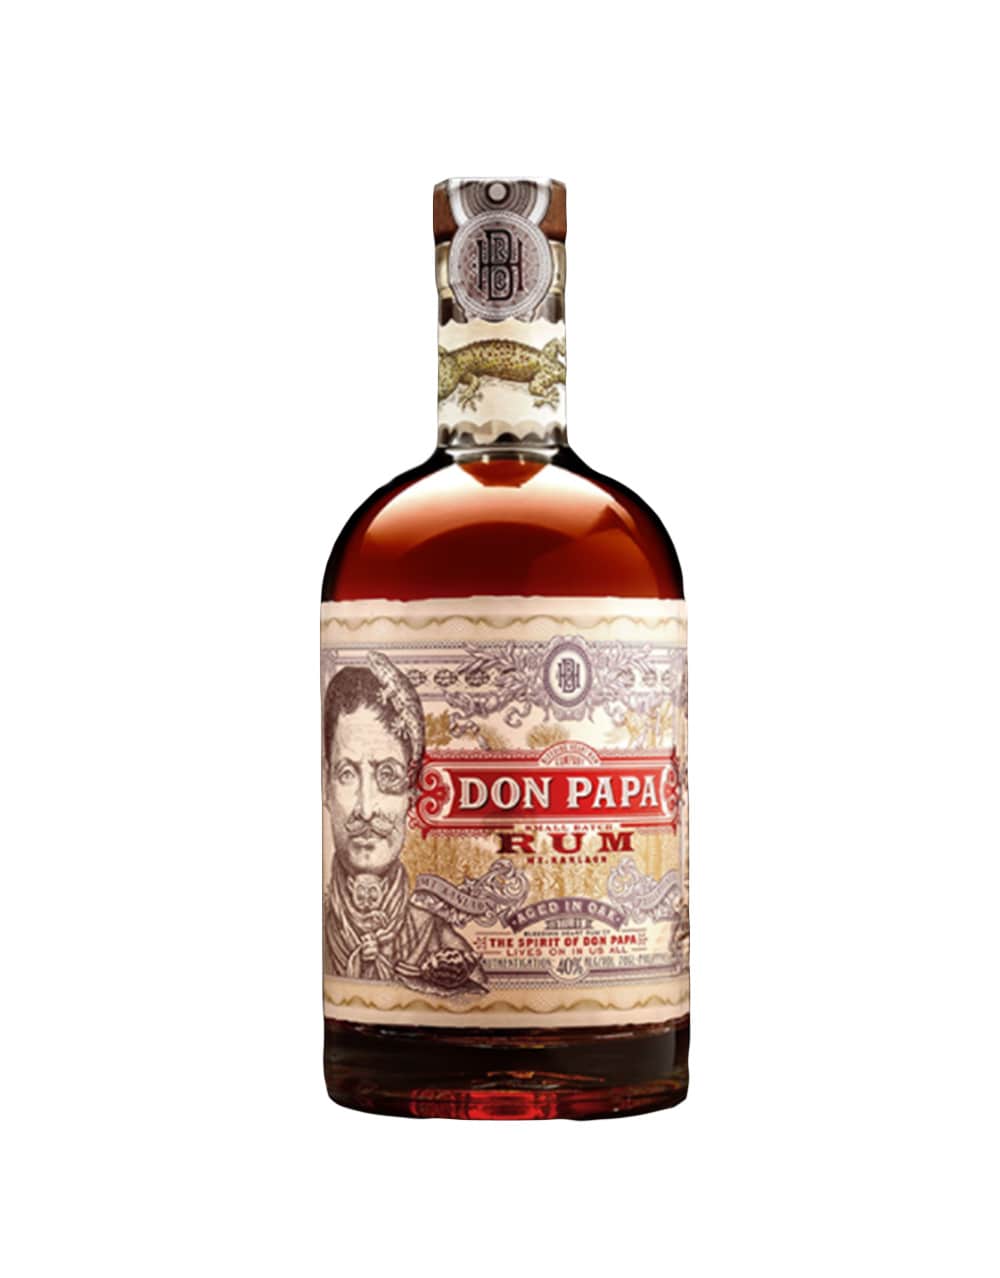 Buy Don Papa Small Batch Rum Online